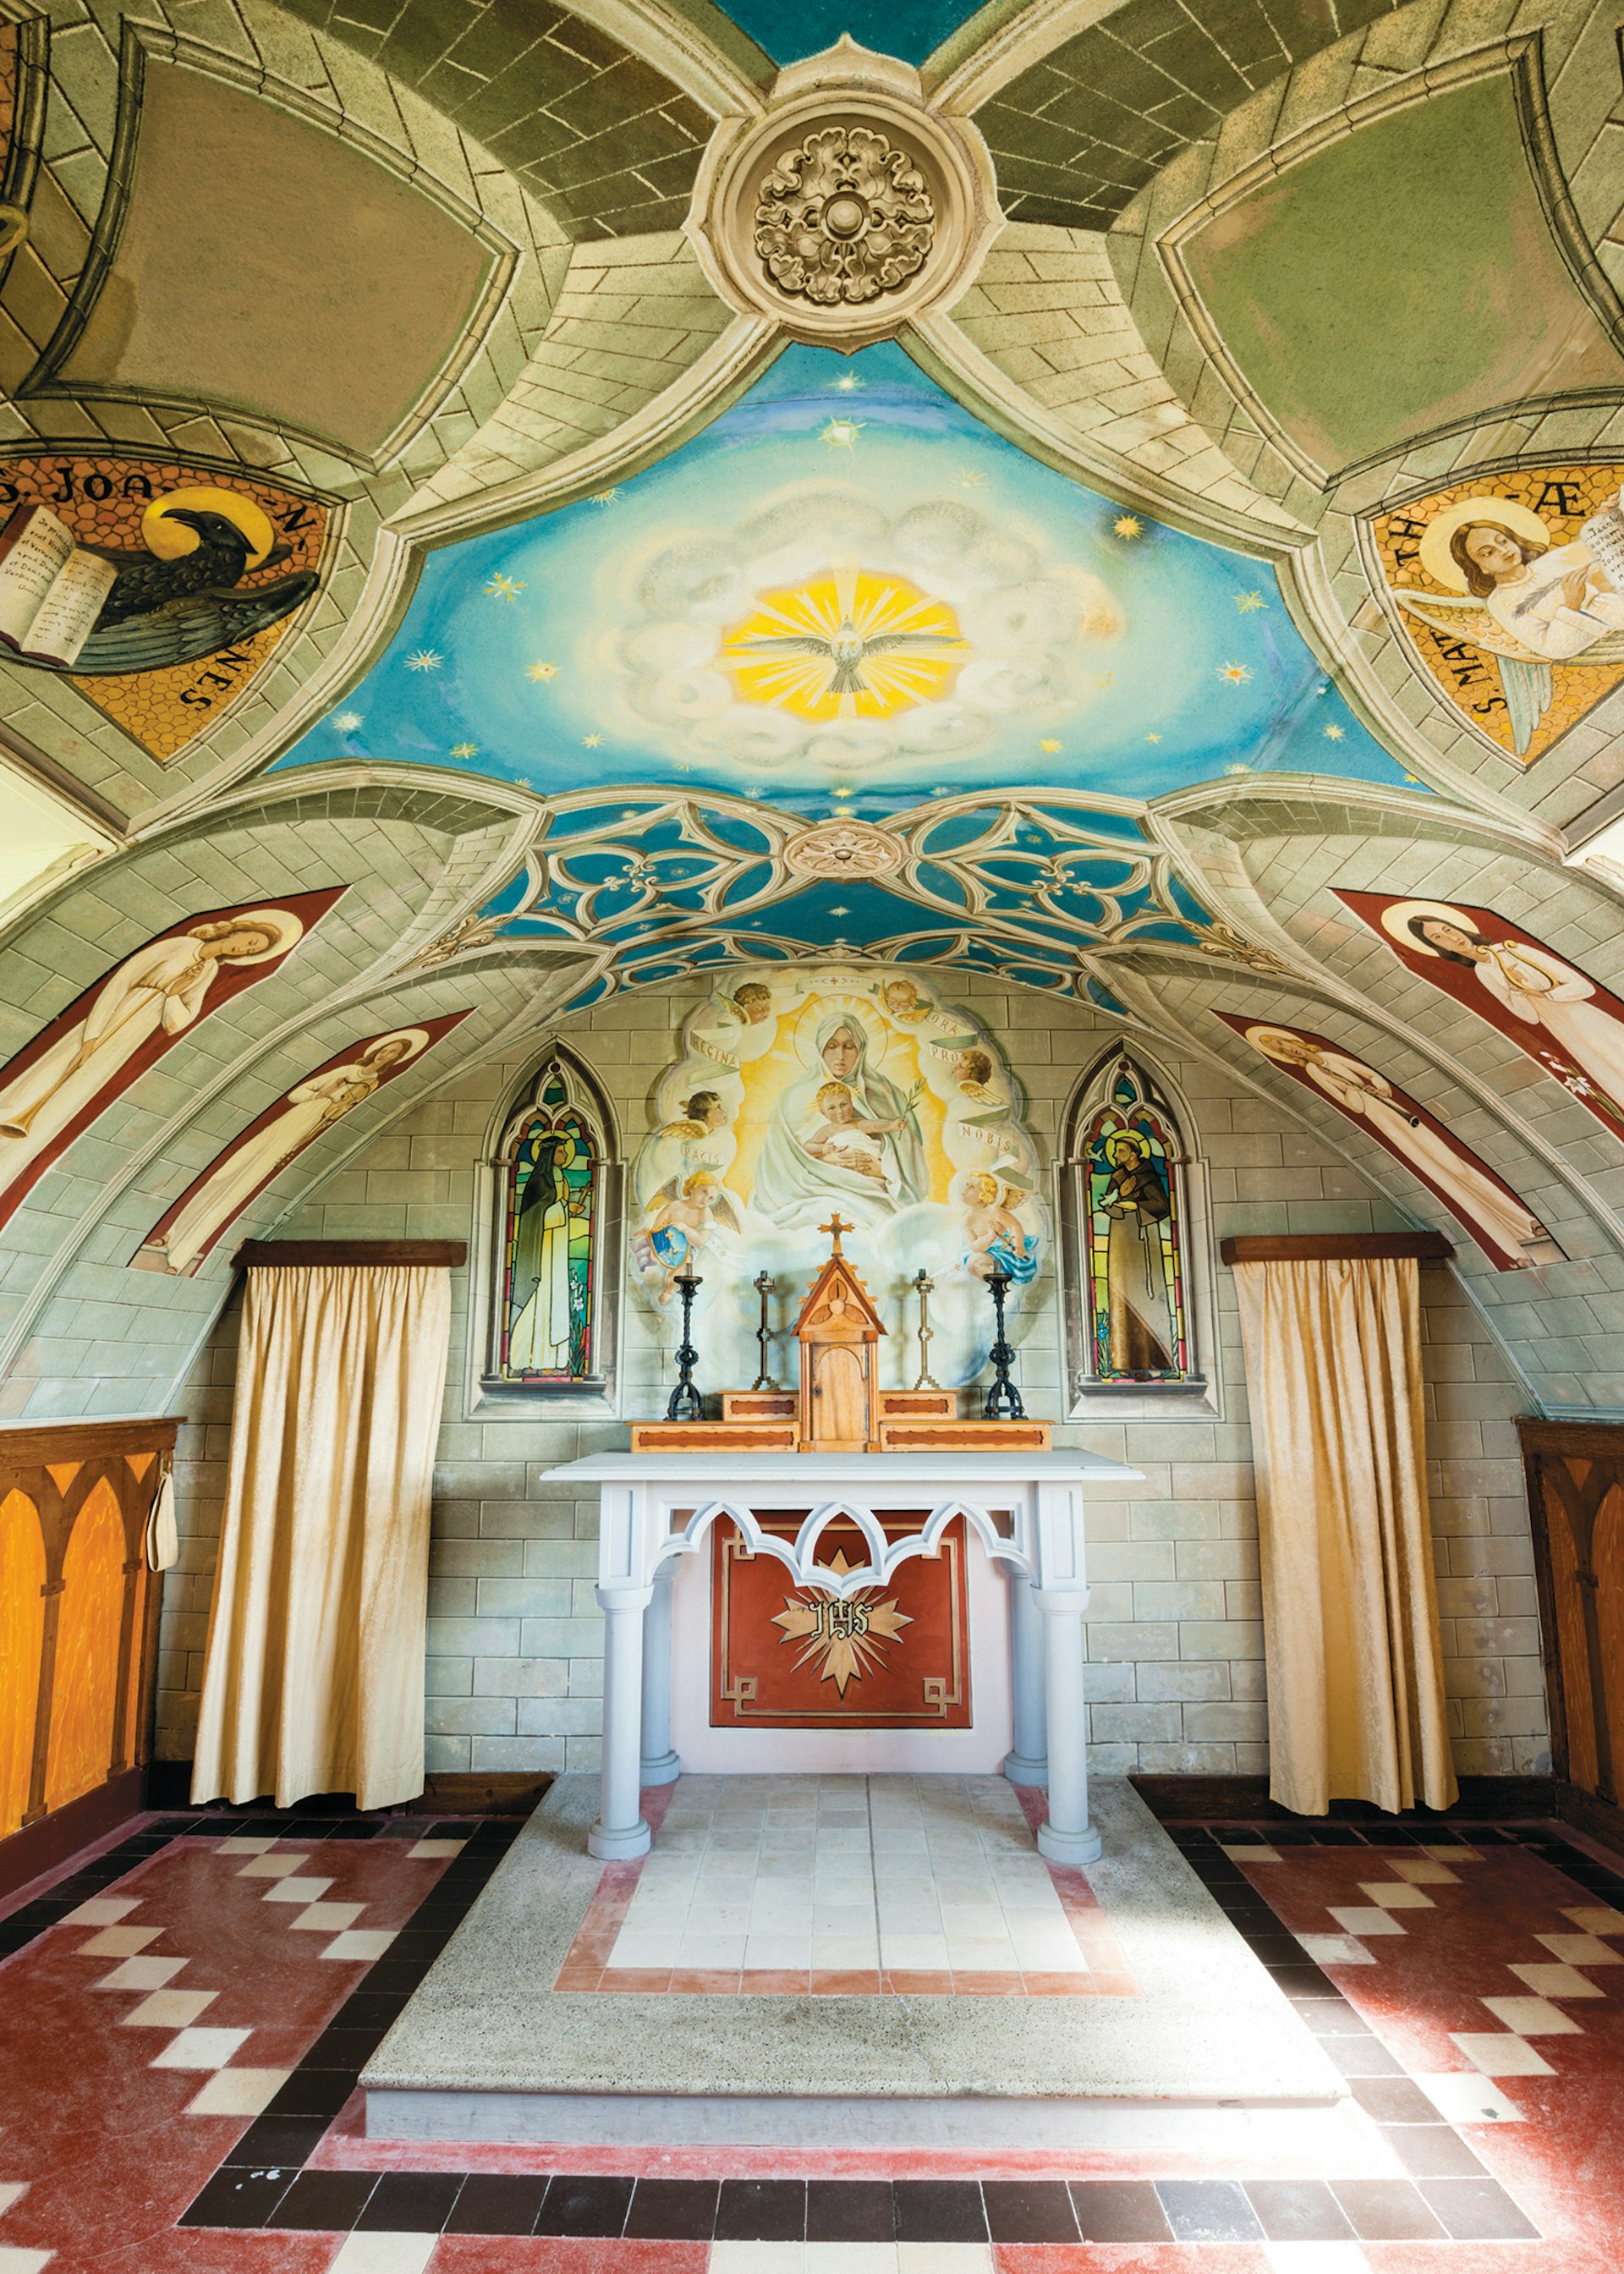 The ornate interior of Orkney’s tiny Italian Chapel © Justin Foulkes / Lonely Planet